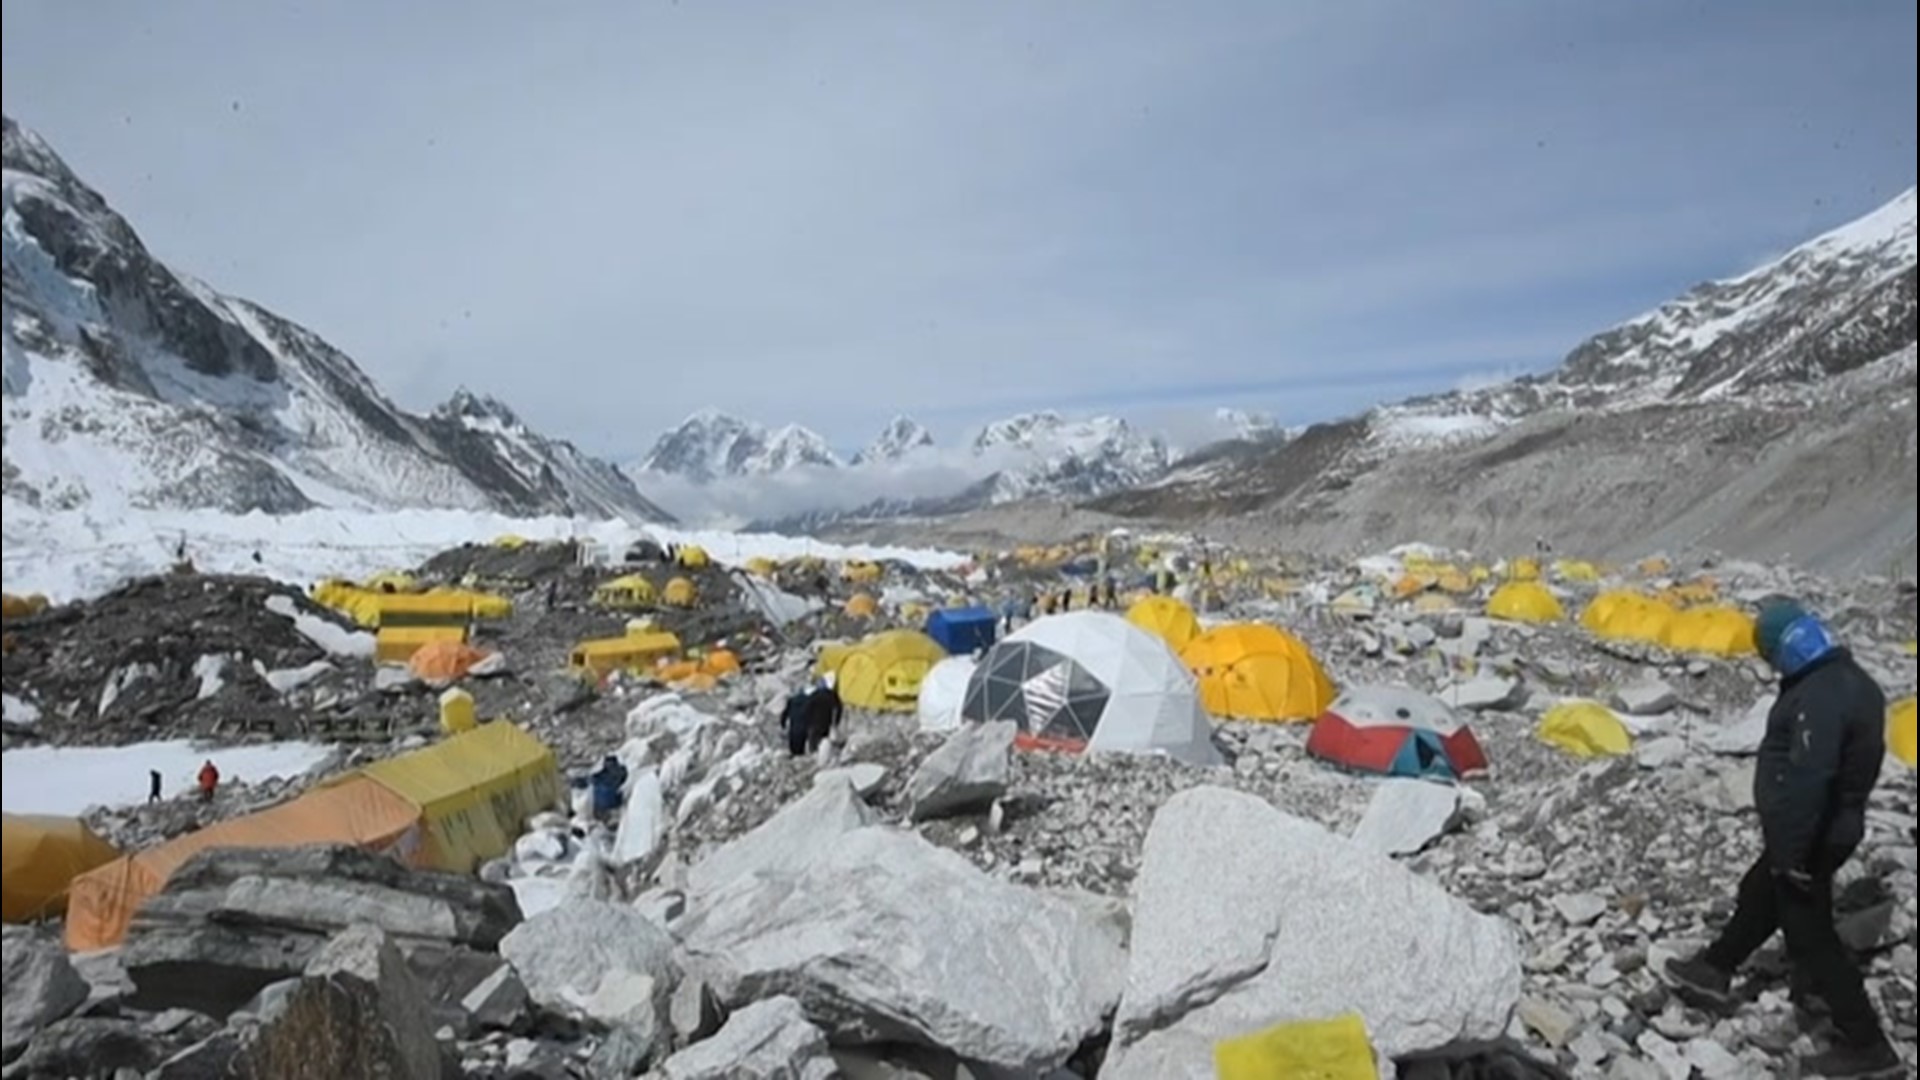 Upwards of 30 climbers looking to summit Mount Everest have been evacuated from the area after contracting COVID-19.